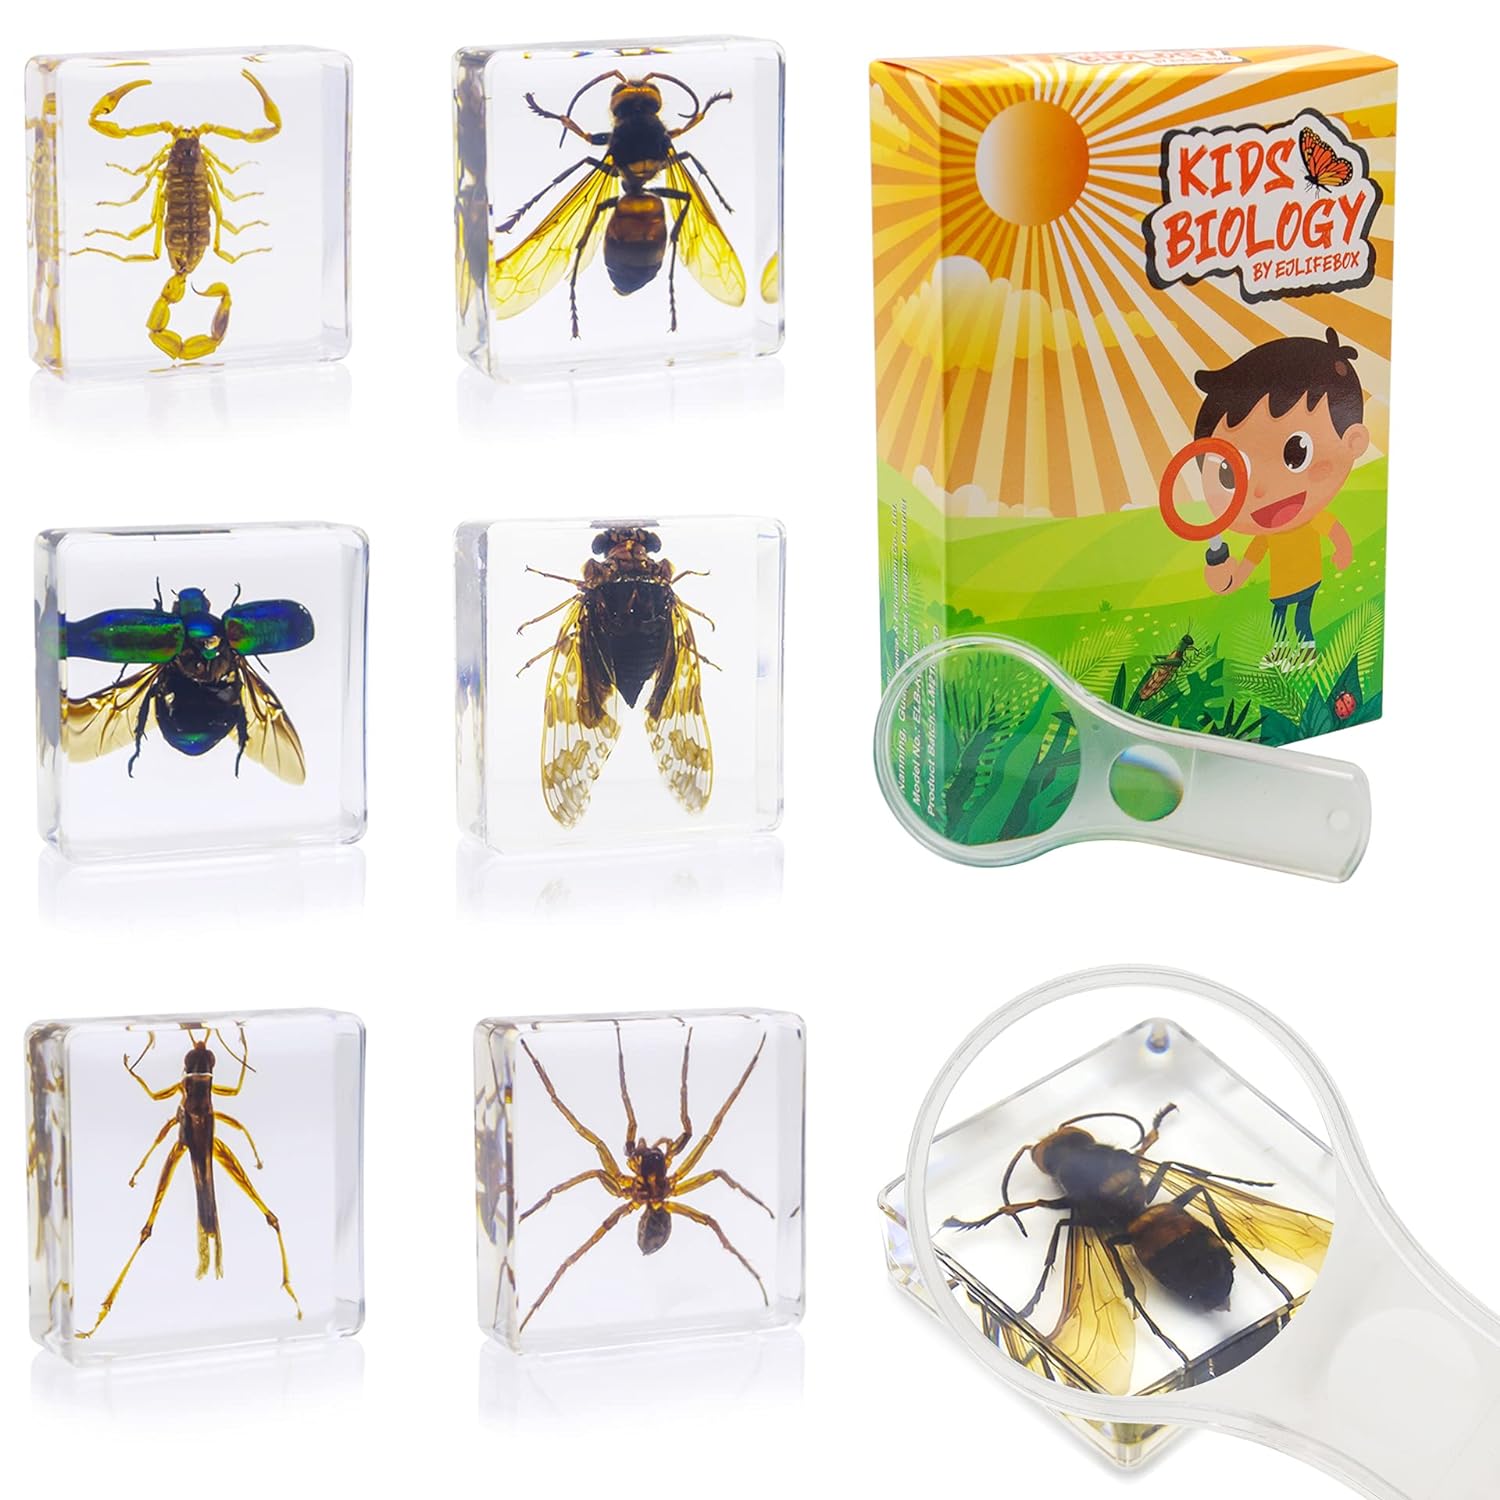 TKM Home 6 Pcs Insect Specimen Set,Cicada,Wasp,Spider,Scorpion,Locust,Chafer Resin Collection Science Toys